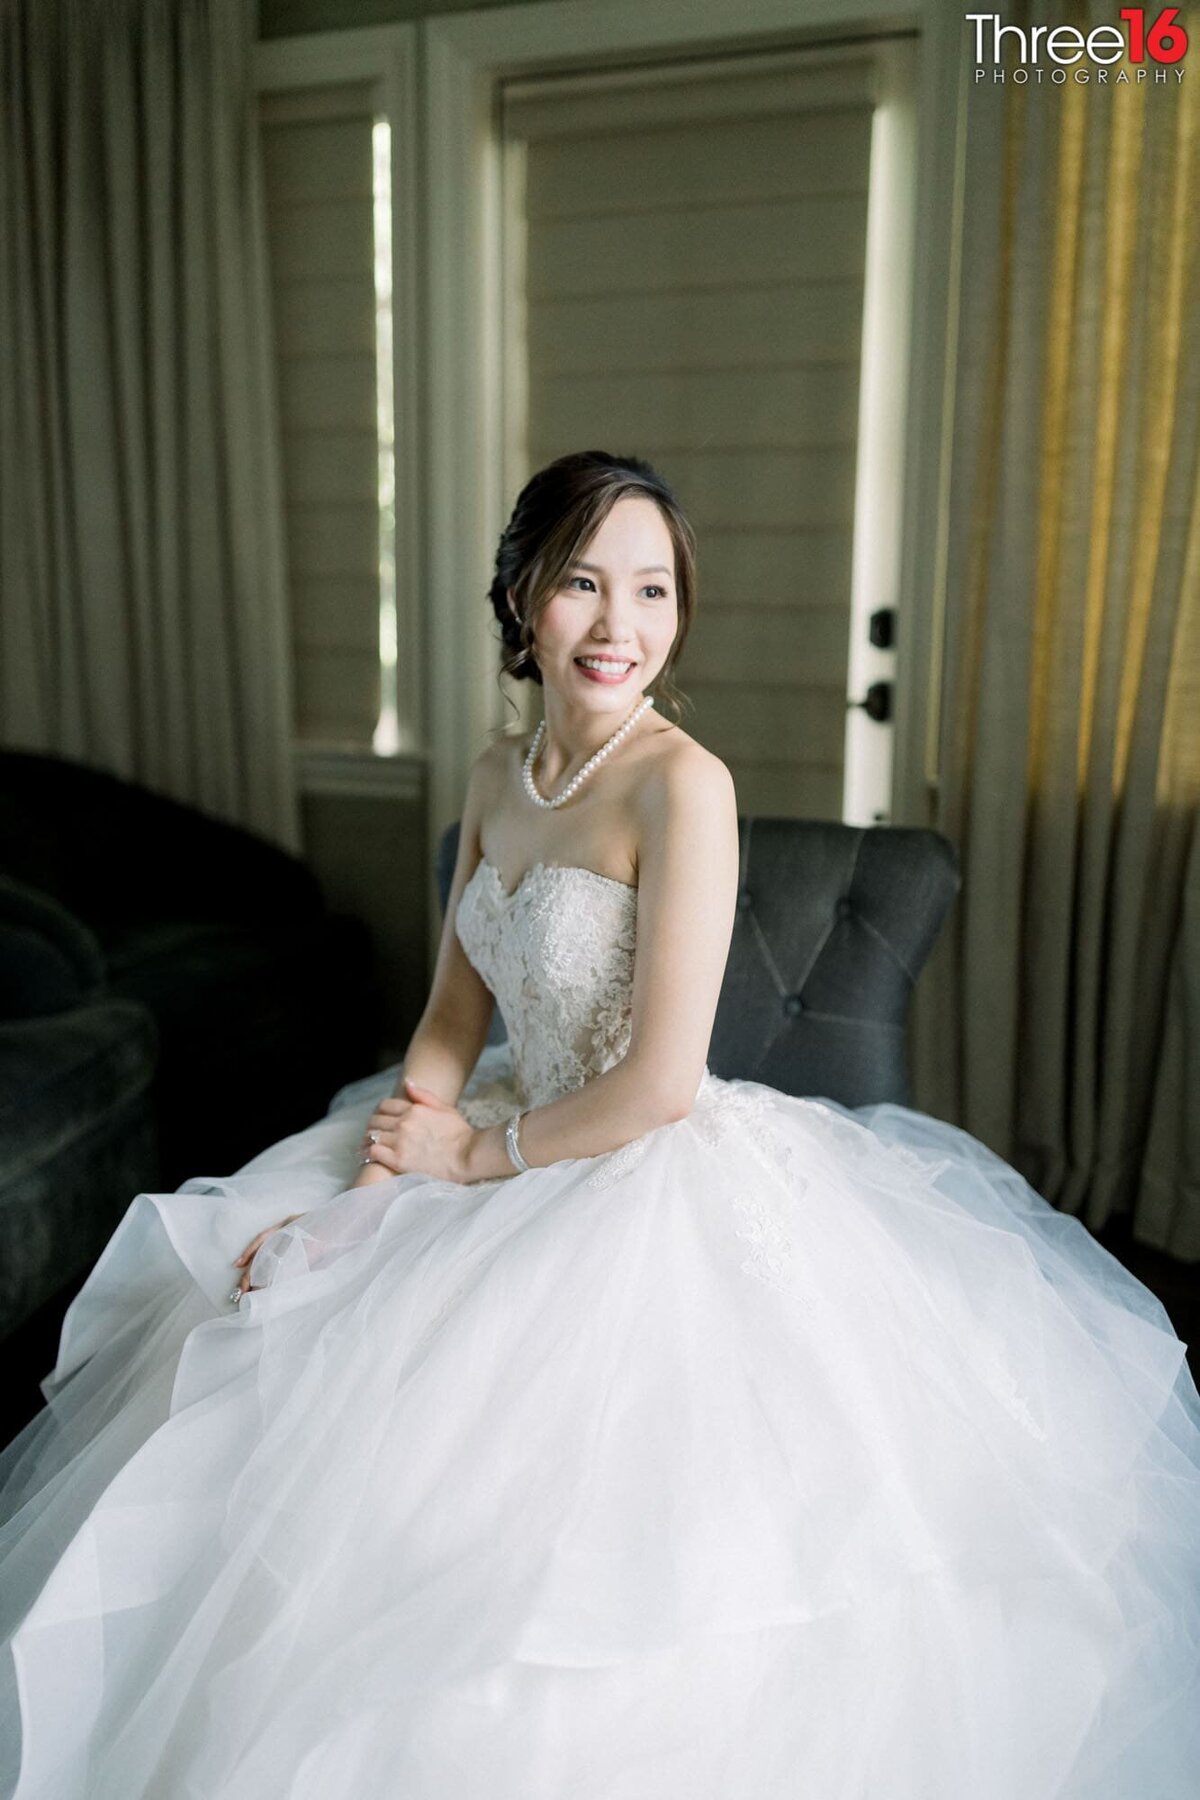 Bride smiles as she sits with her wedding gown fluffed out